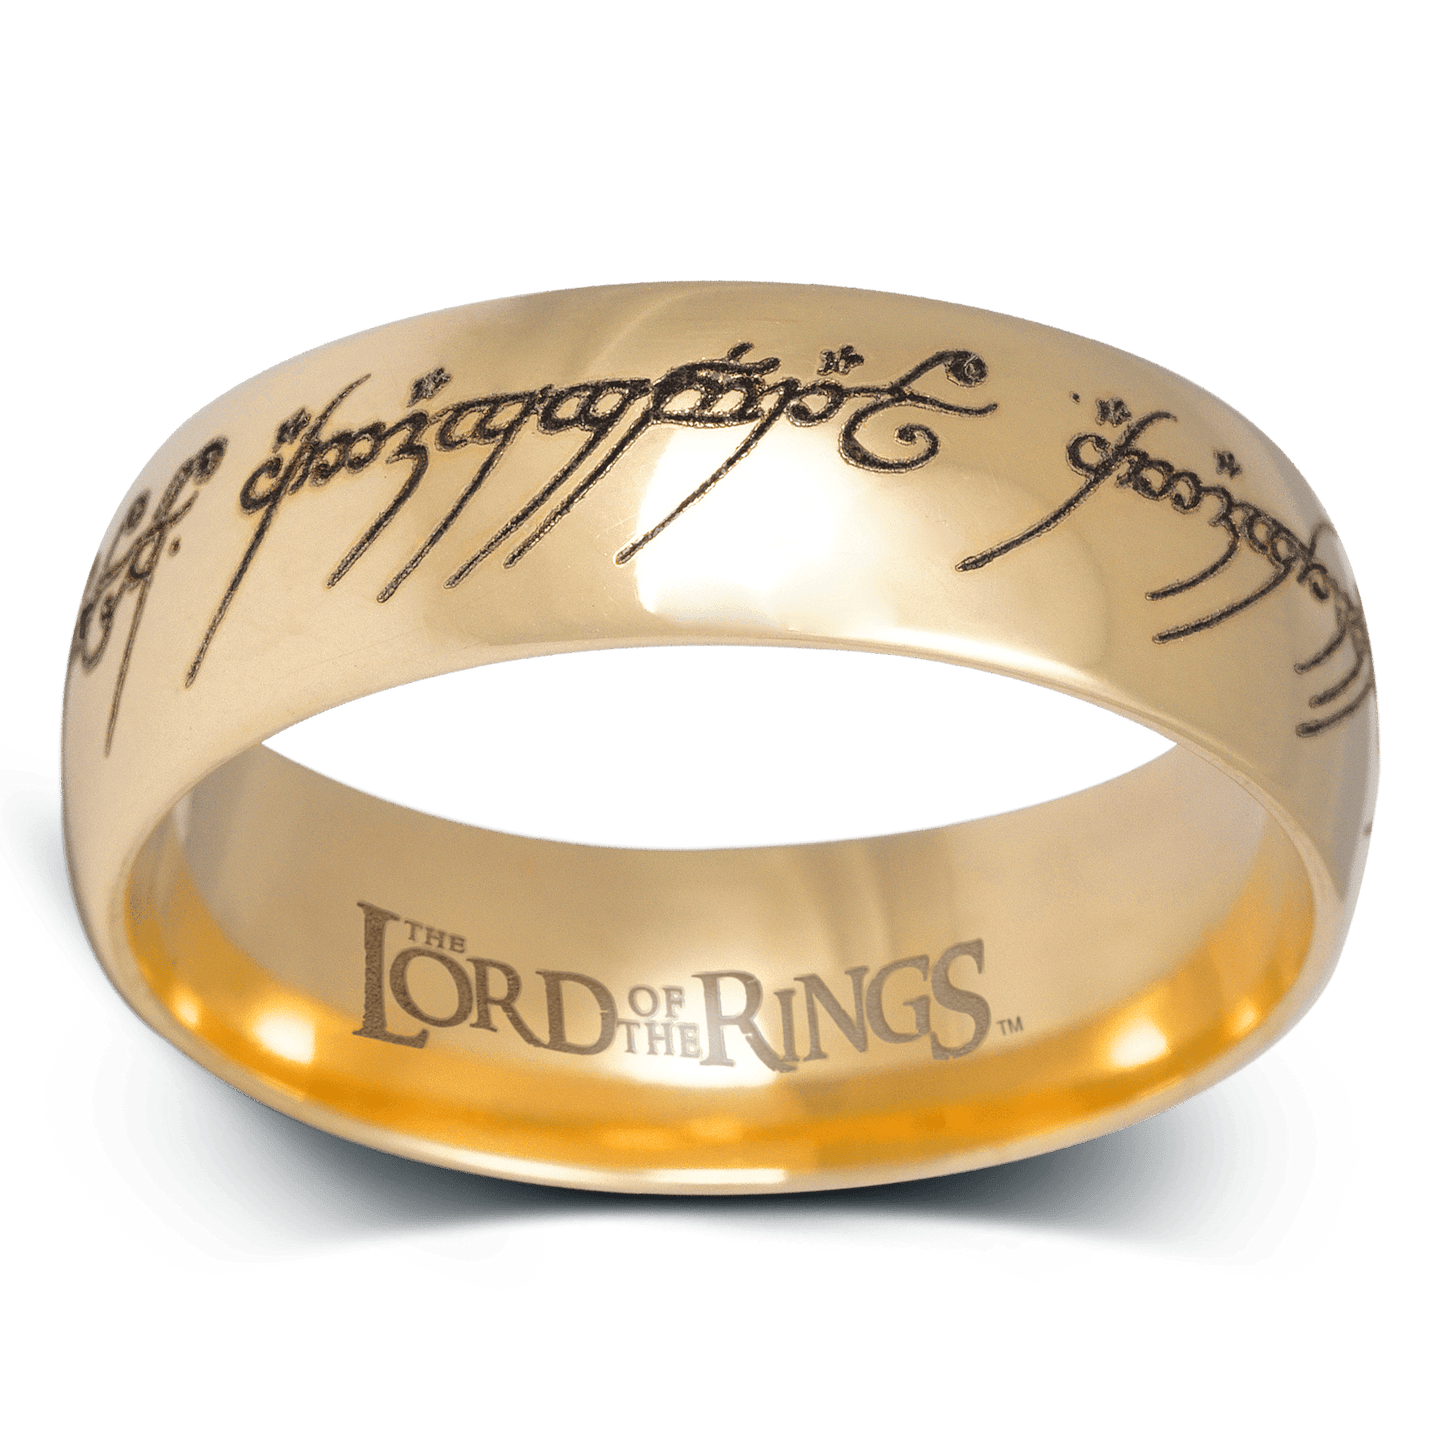 One Ring to Rule Them All Rose Gold Band